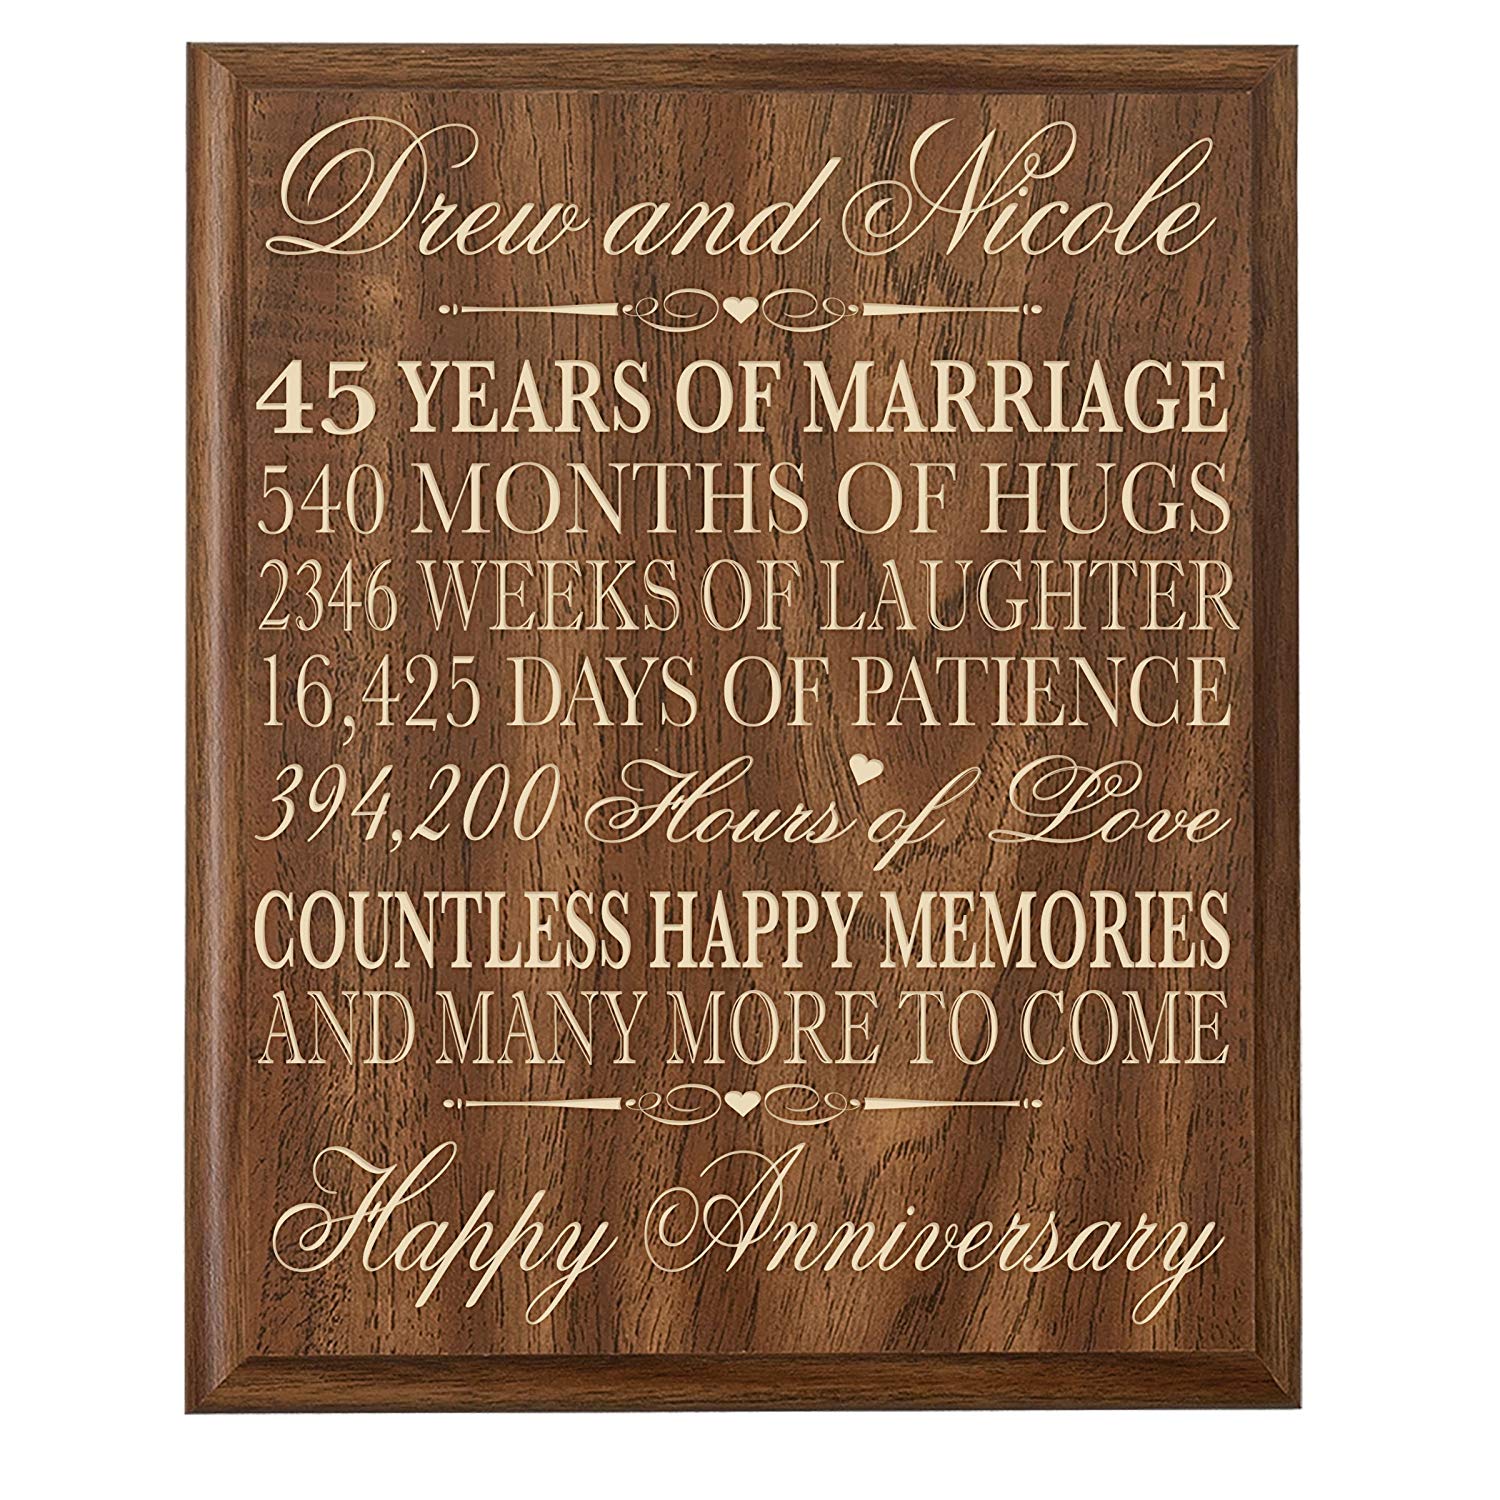 Personalized 45th Anniversary Wall Plaque Gift - Countless Happy Memories - LifeSong Milestones